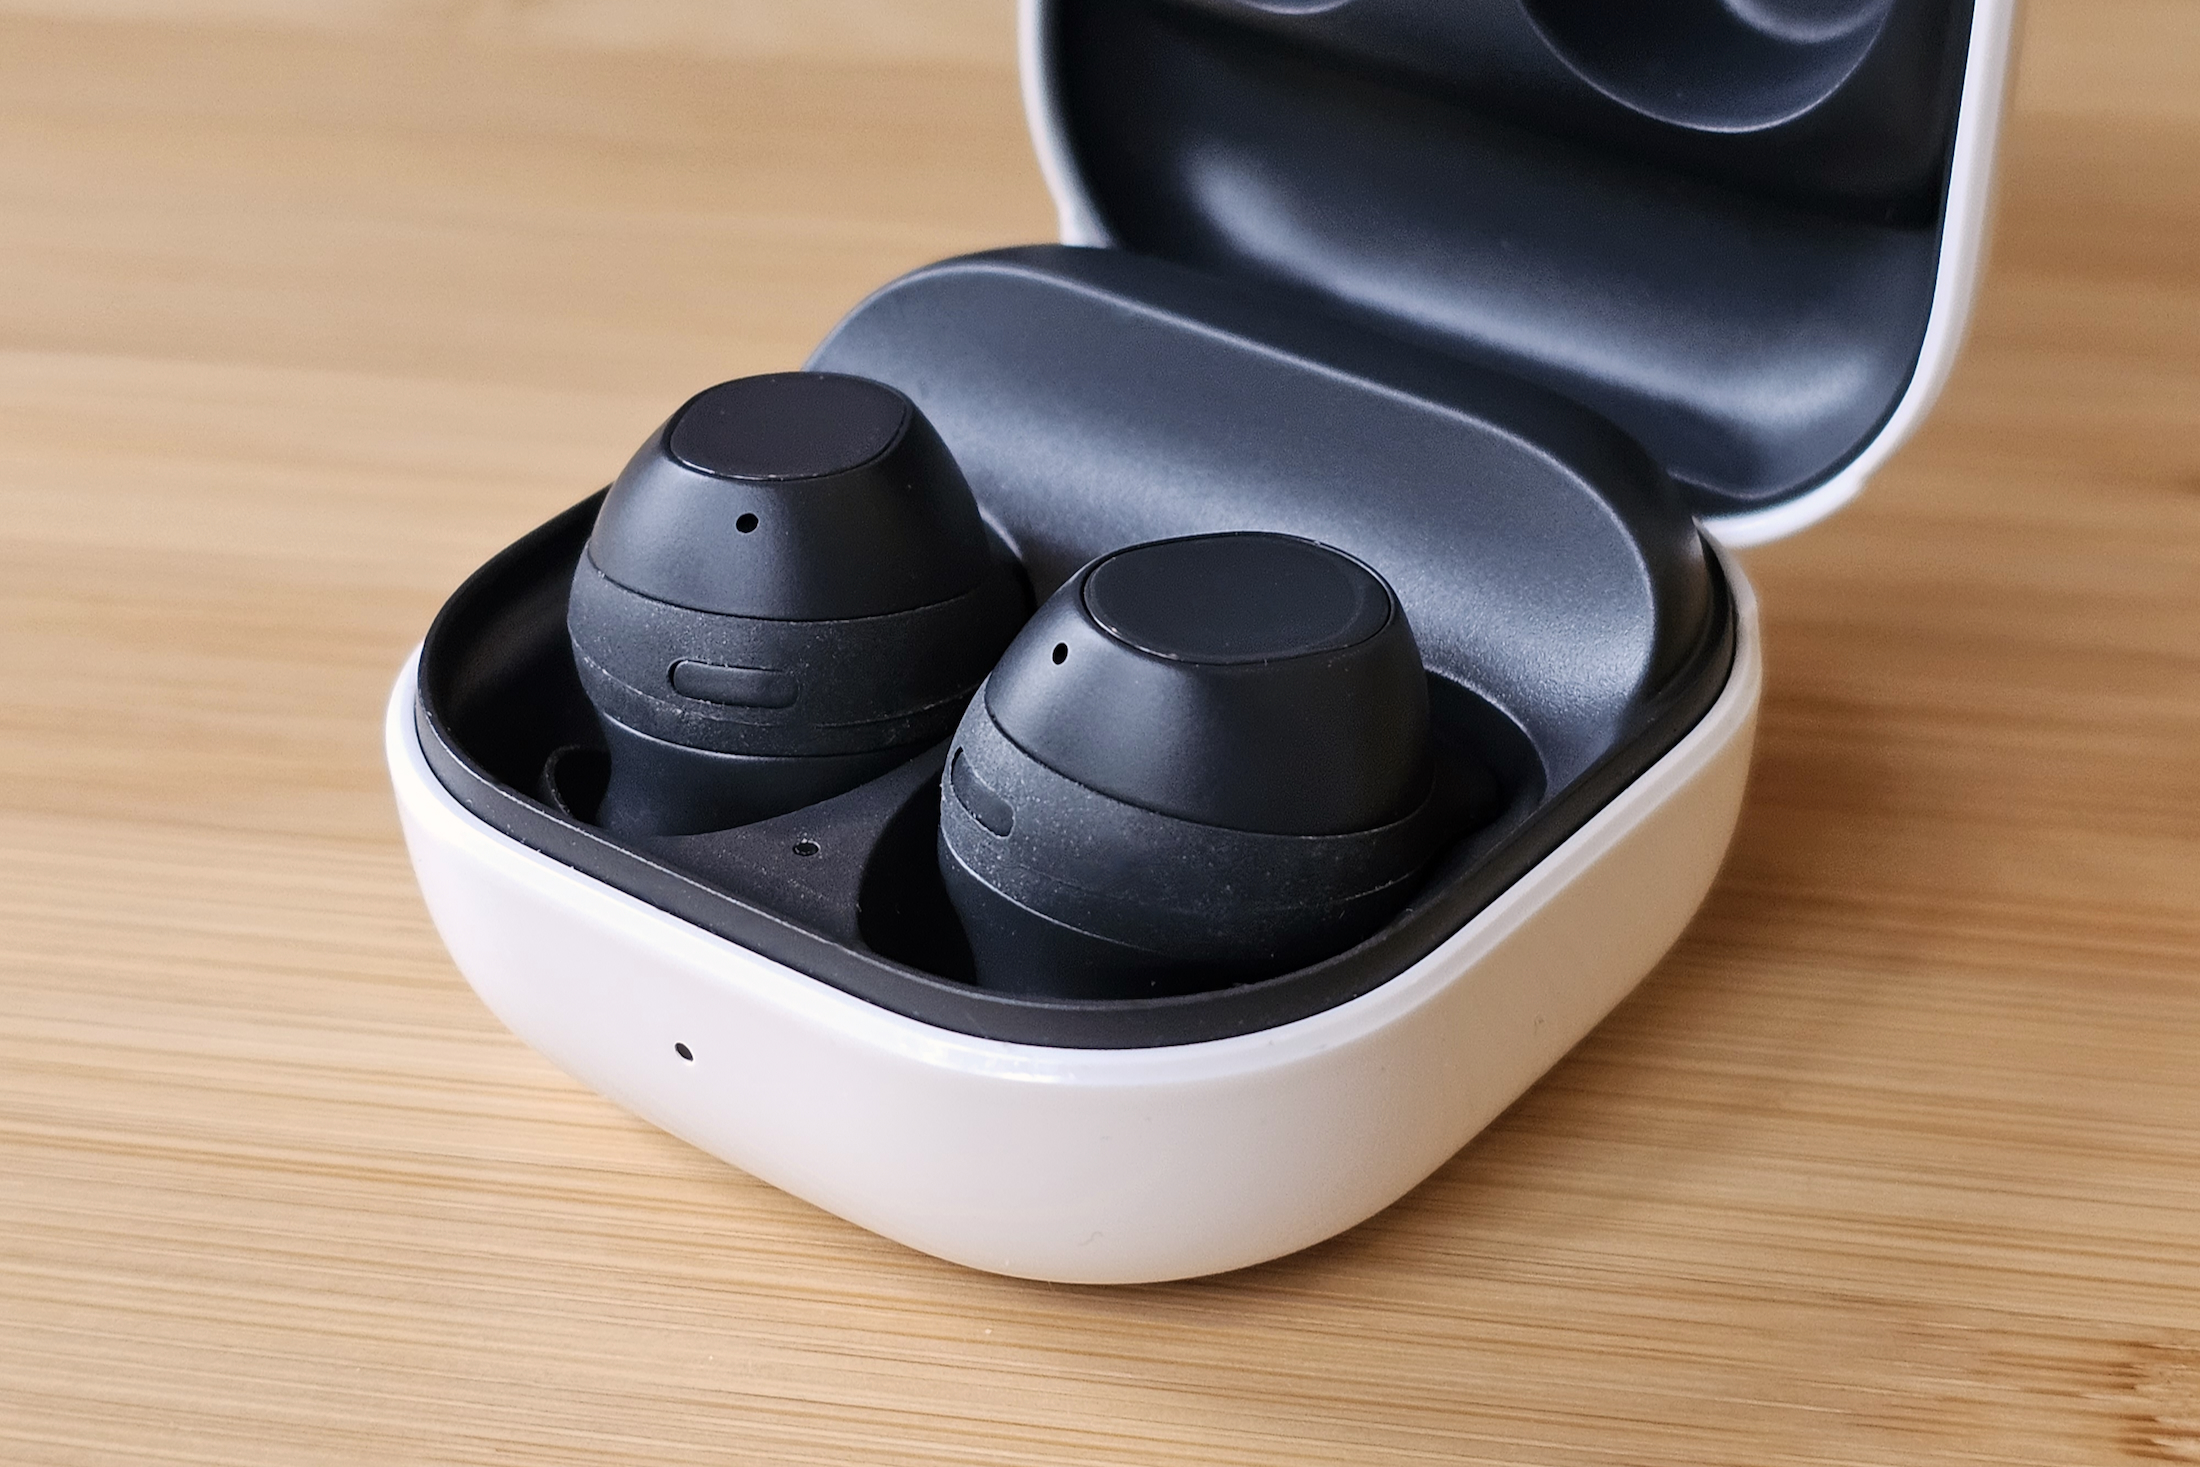 Samsung Galaxy Buds FE review: Excellent value - Can Buy or Not